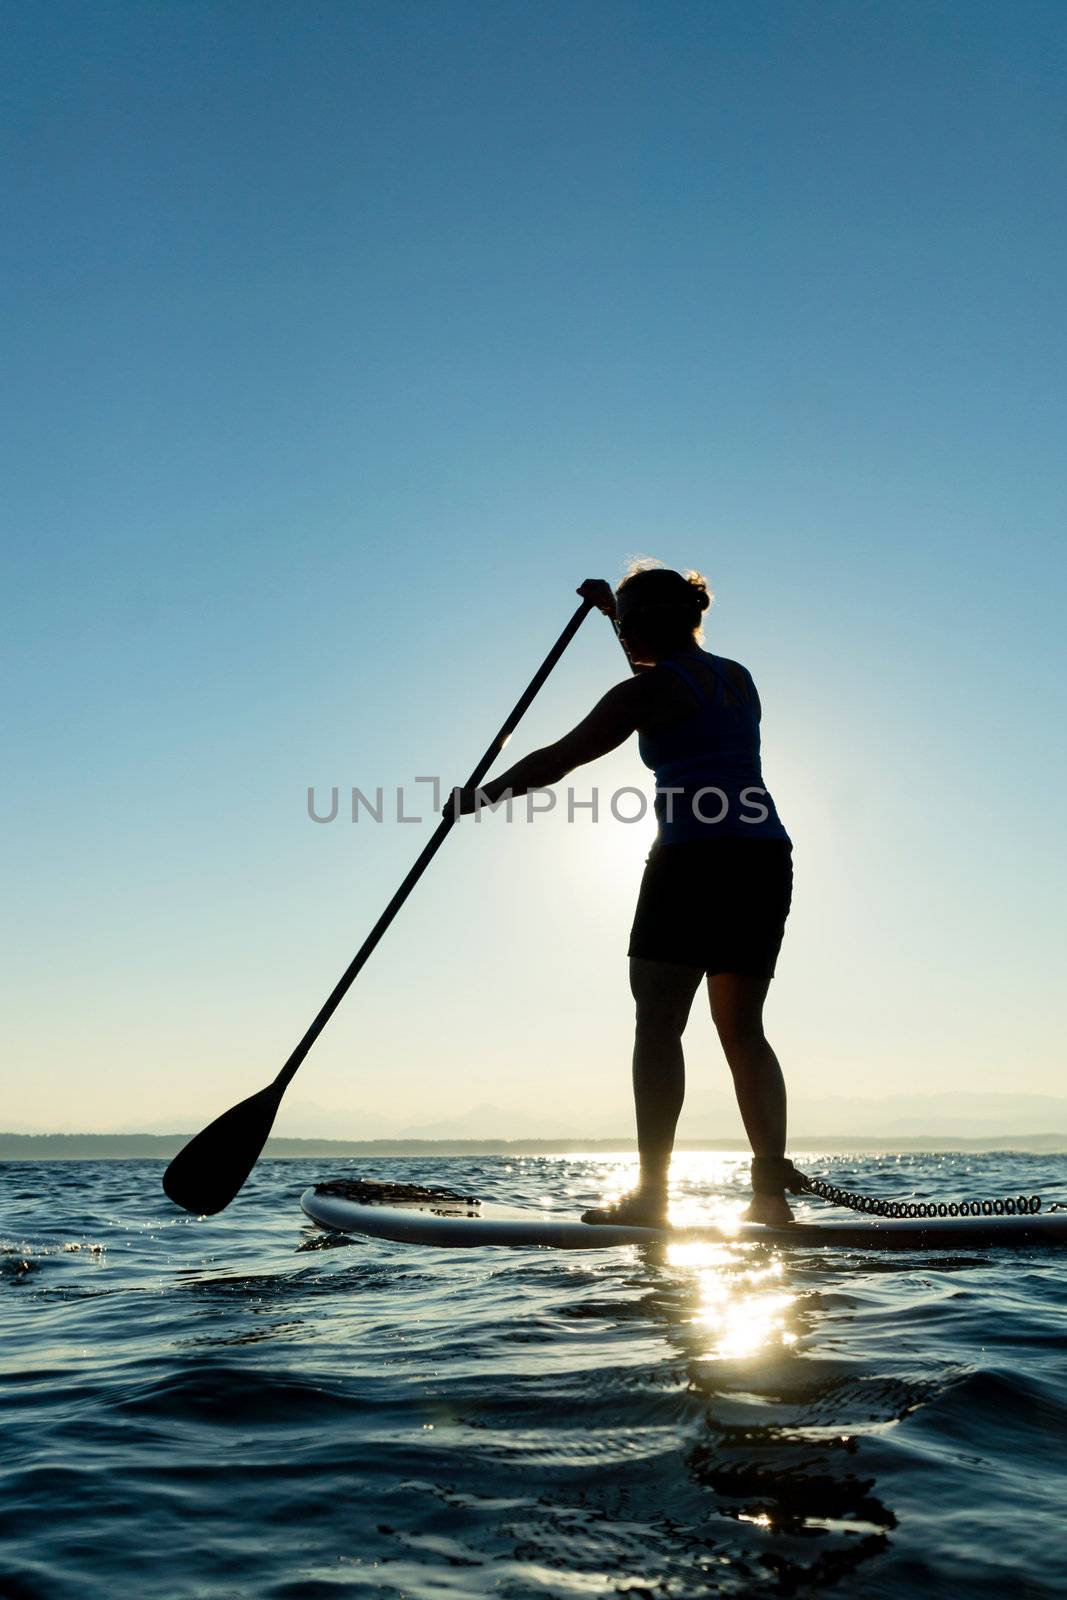 Womann paddling stand up paddle board at sunset with blue sky in background.